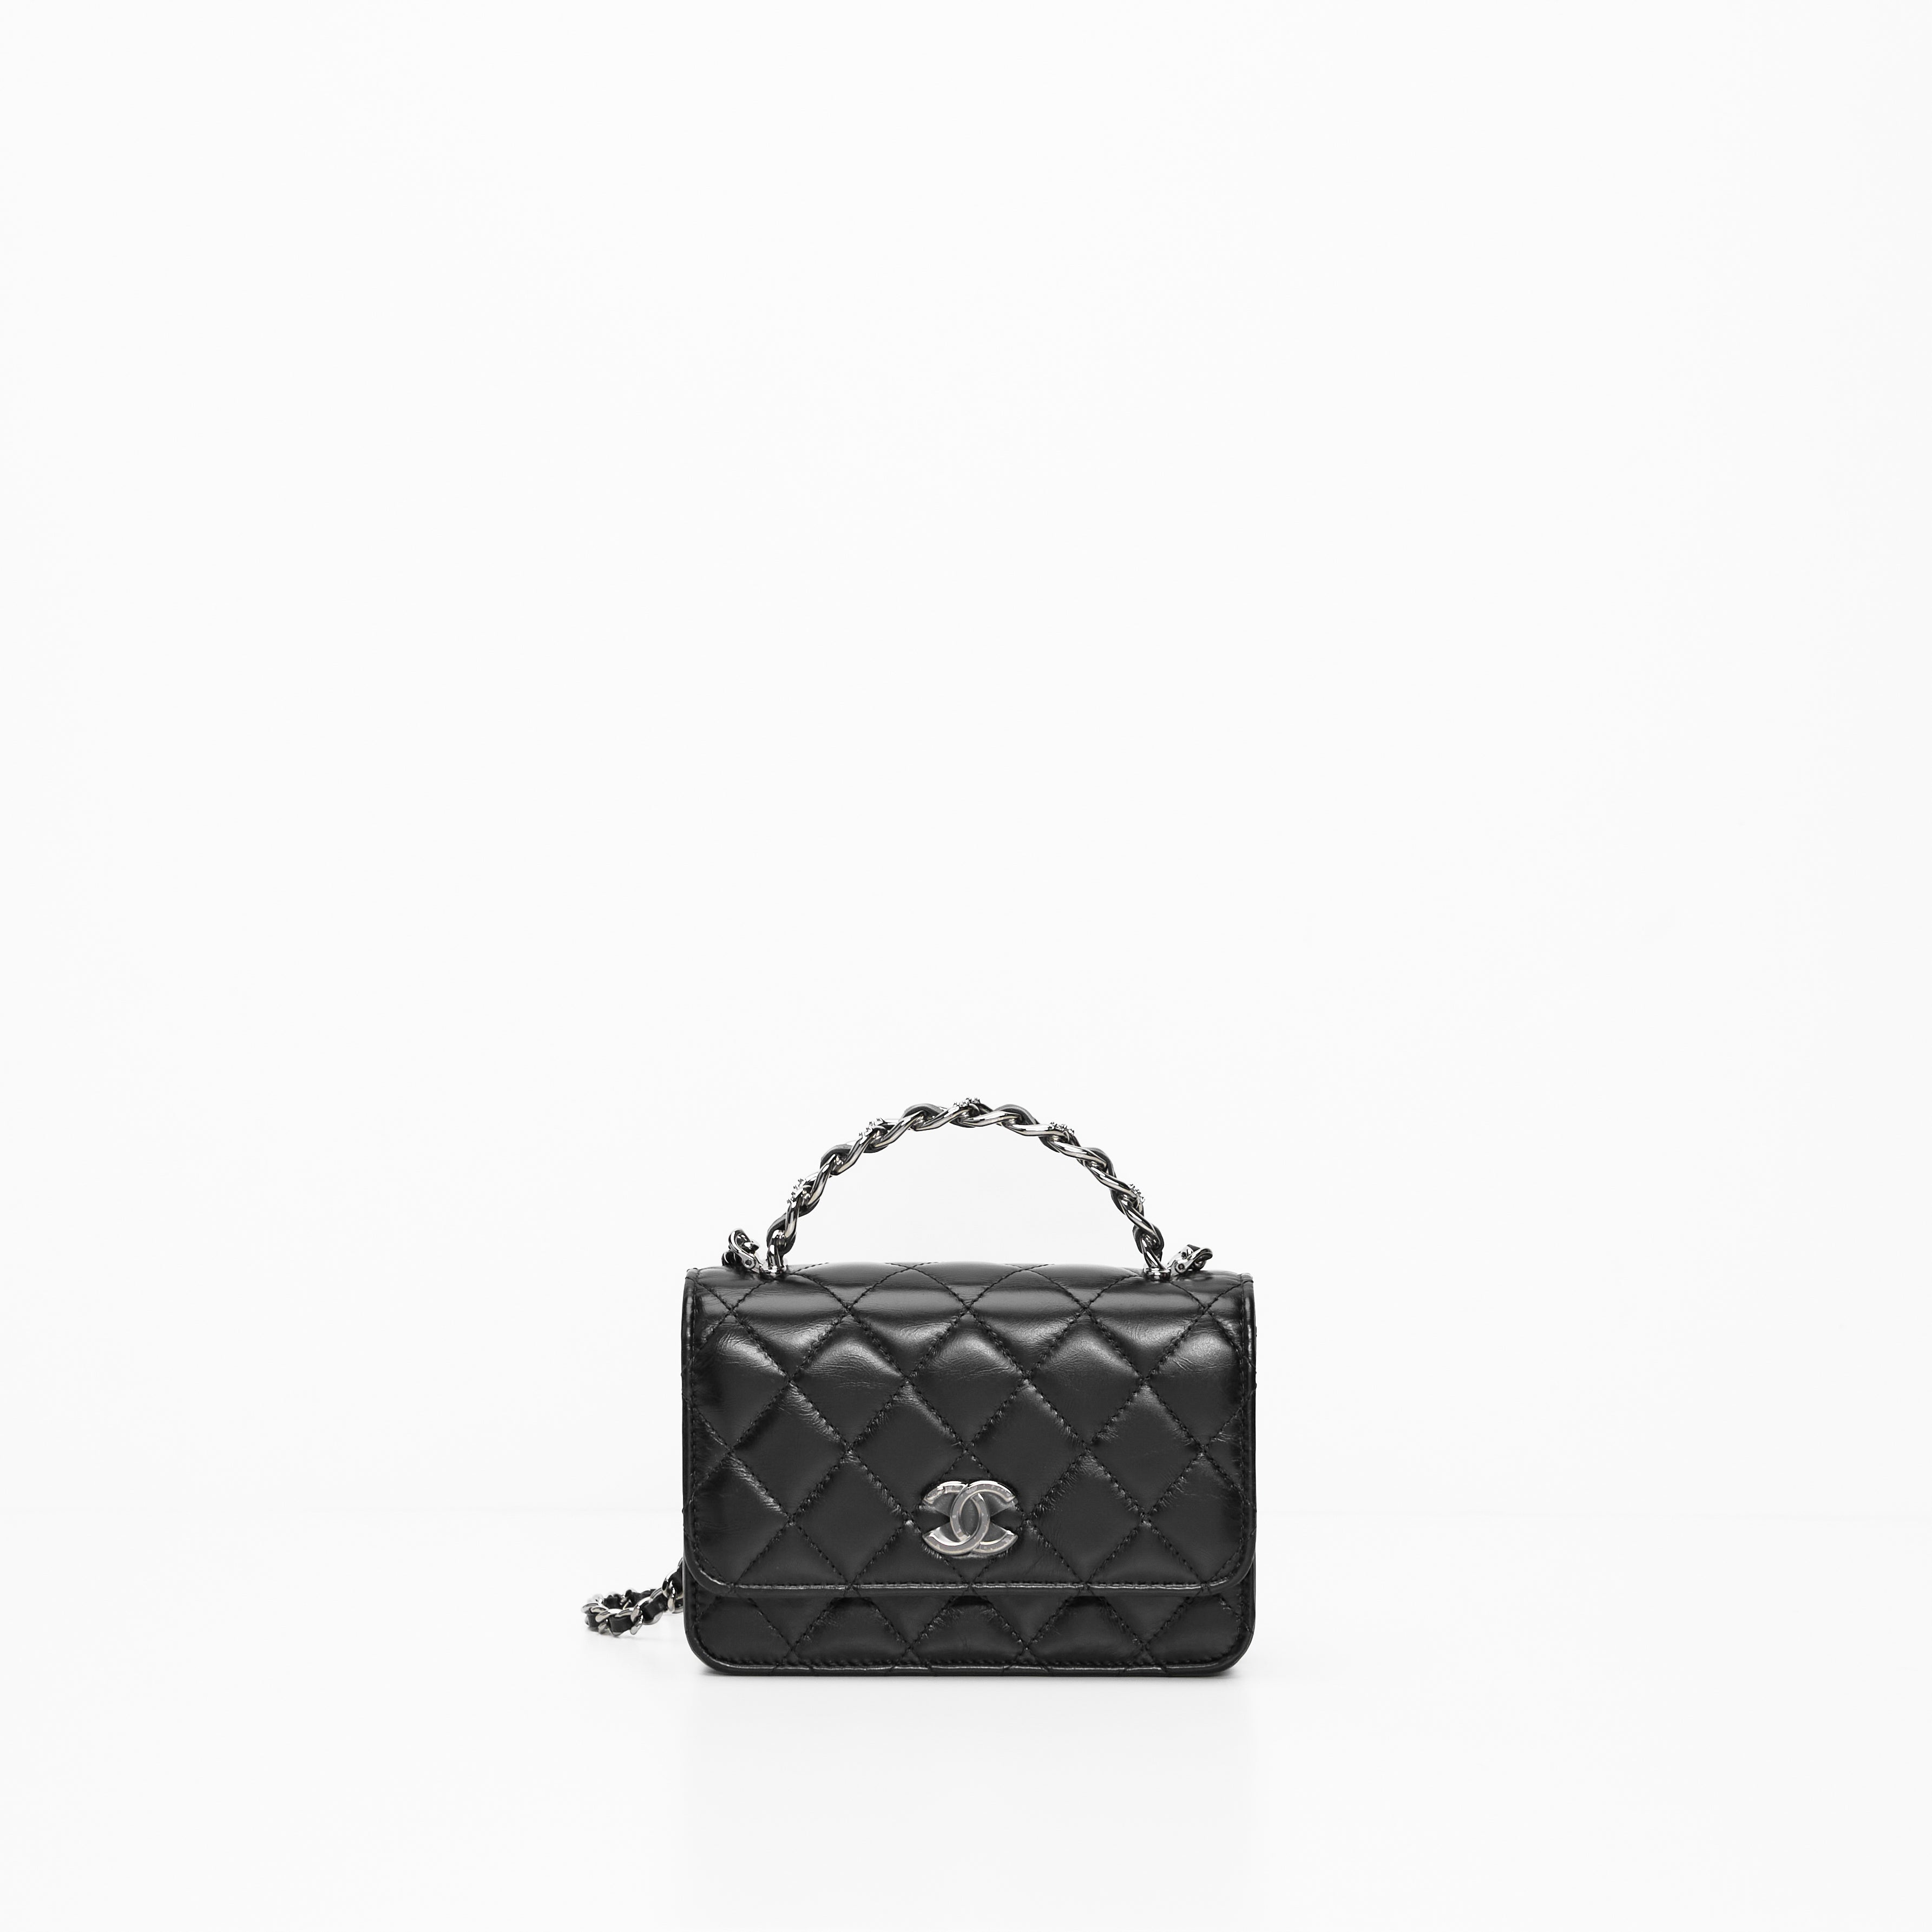 Chanel 23k with top handle